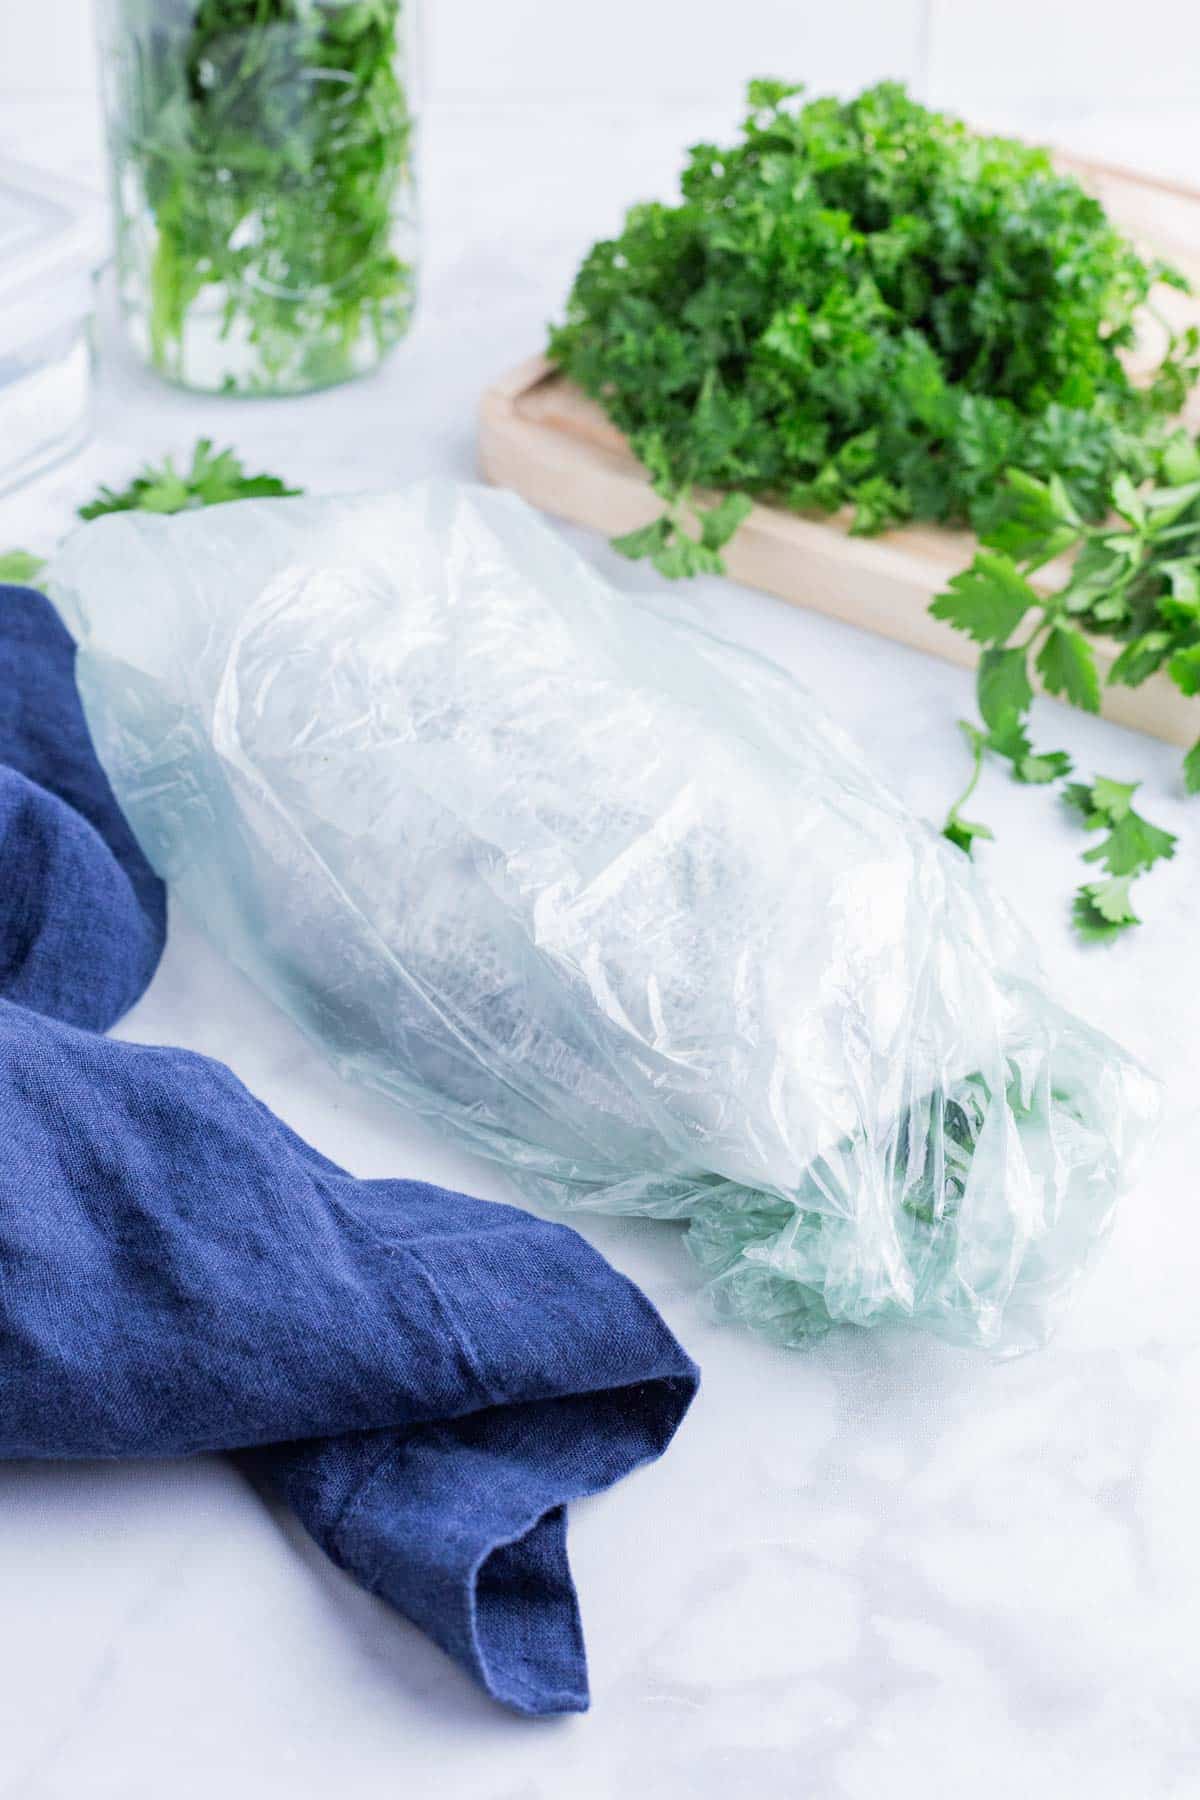 A bunch of parsley is wrapped in a damp paper towel.